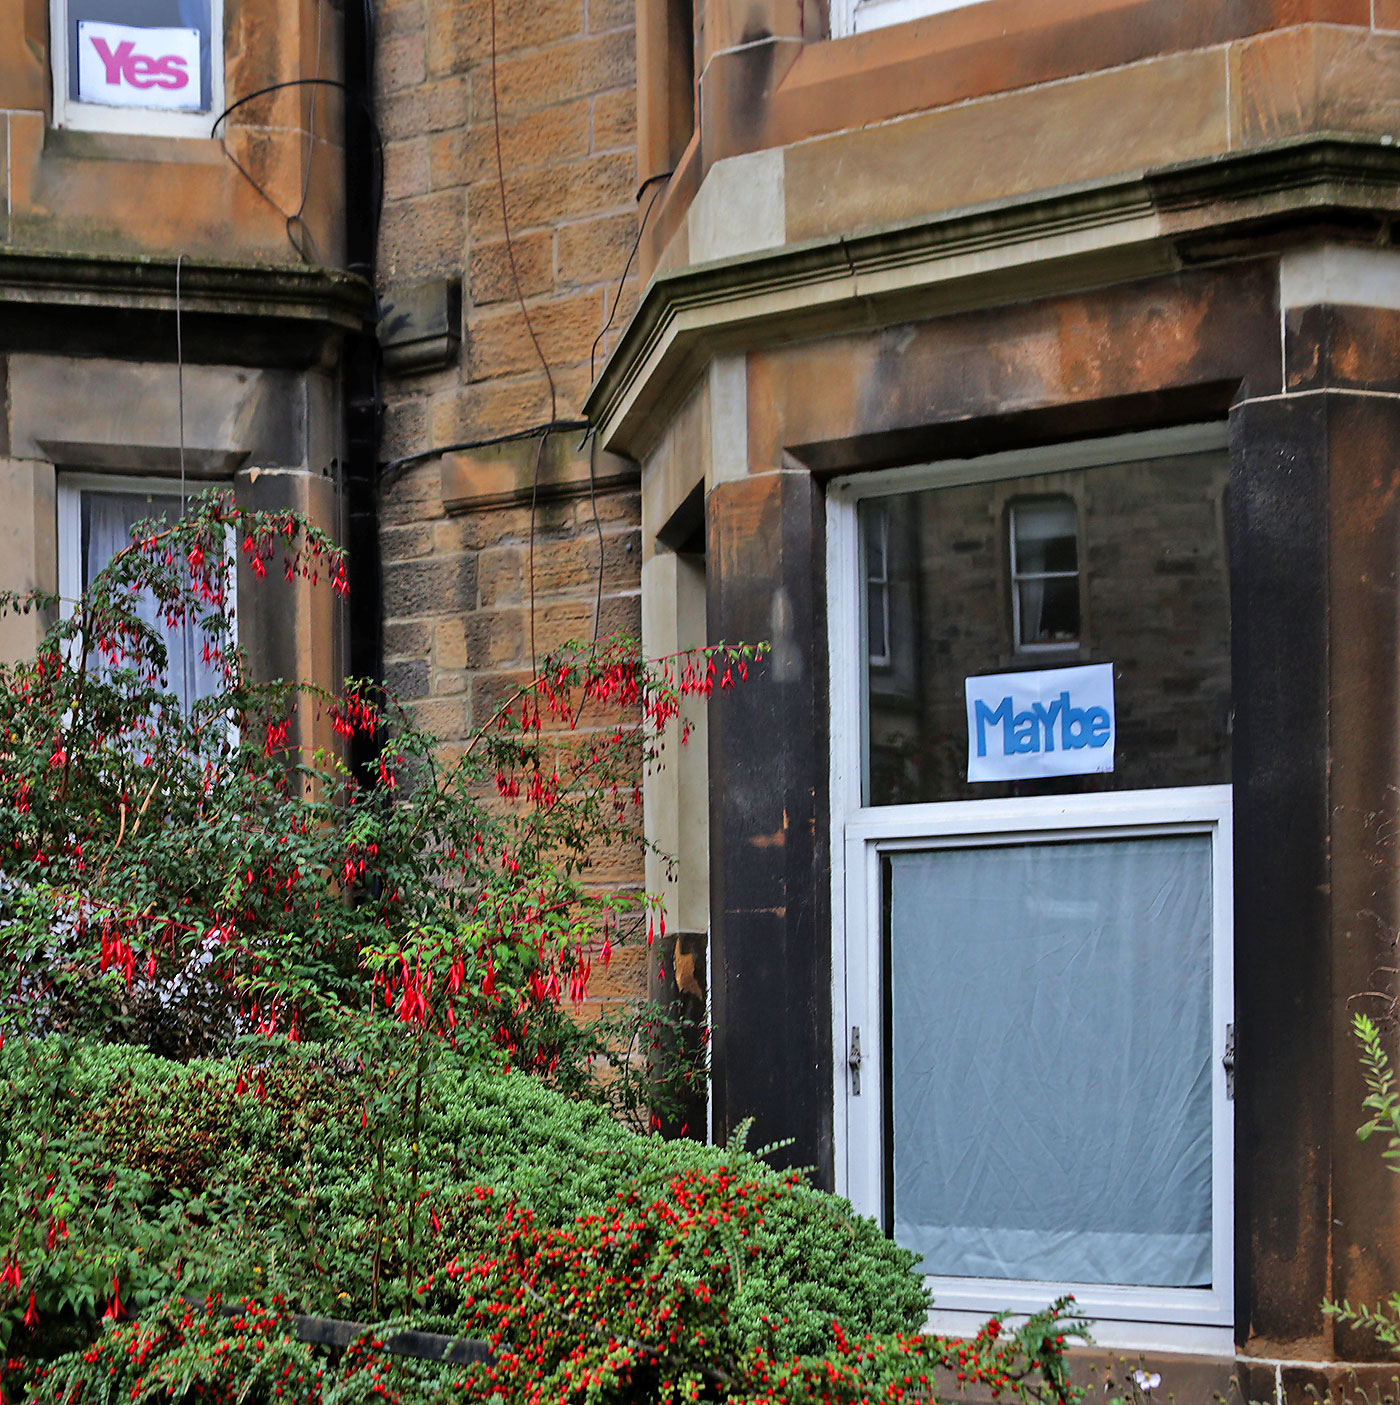 Photos taken in Edinburgh on the two days leading up to the Scottish Referendum Vote on 18 September 2014  -  'Yes' and 'Maybe' Posters at Marchmont Crescent, South Side